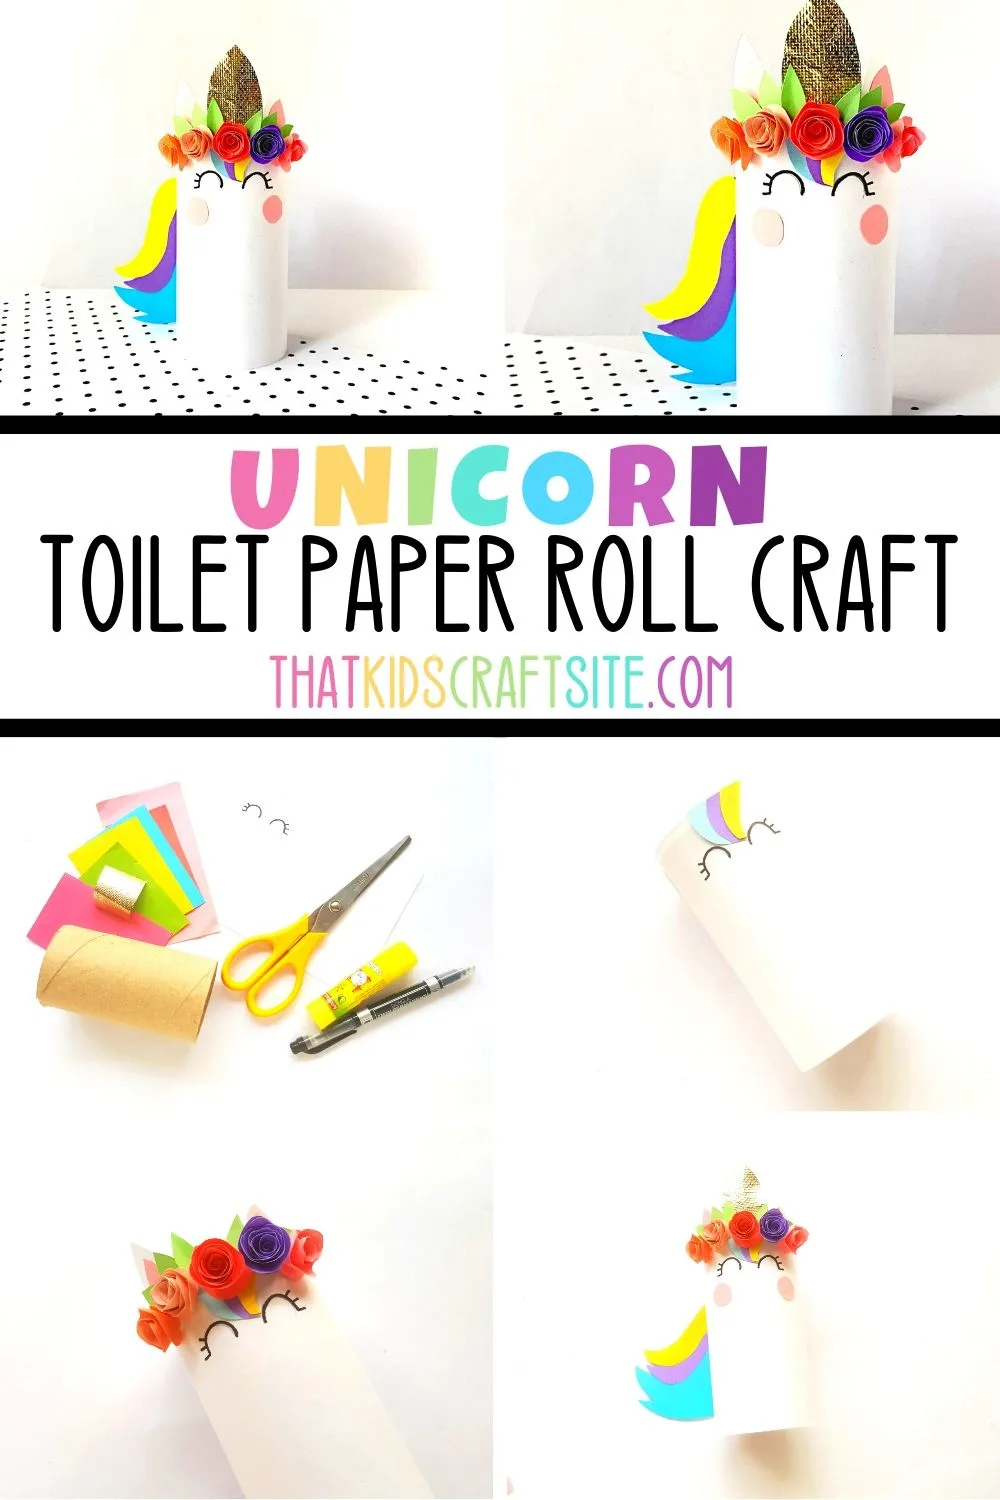 Unicorn Toilet Paper Roll Craft for Kids - a Fun Recycled Craft for Kids- ThatKidsCraftSite.com